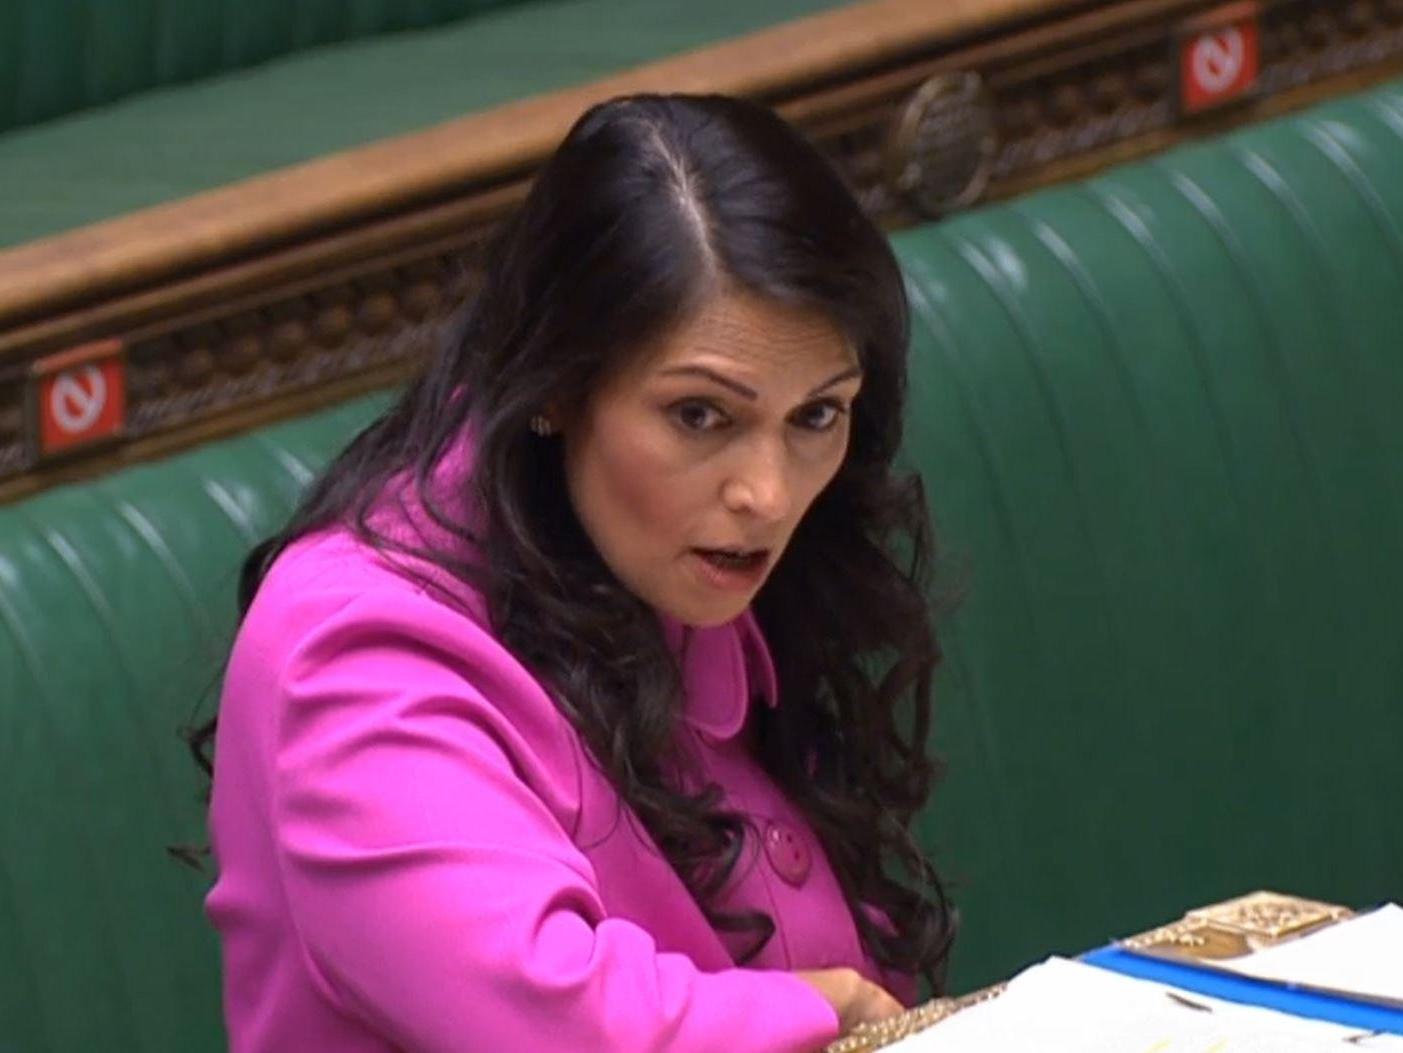 Home secretary Priti Patel has taken a tough line on people smuggling in recent weeks